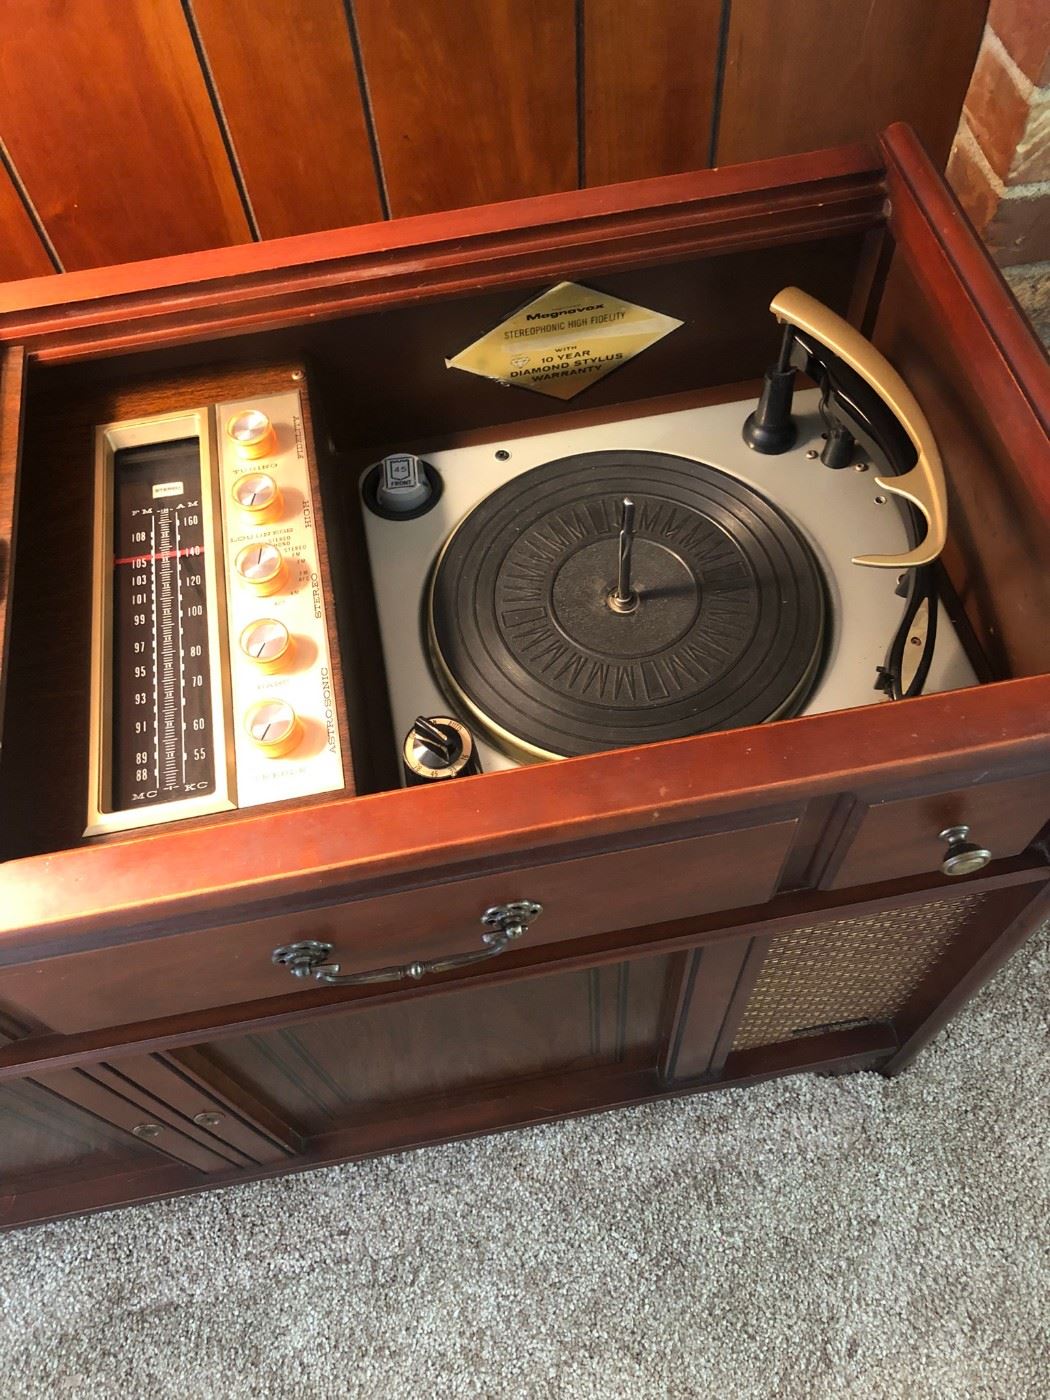 '60s Magnavox high fidelity stereo - turntable, radio tuner, built-in speakers, and record album storage. 